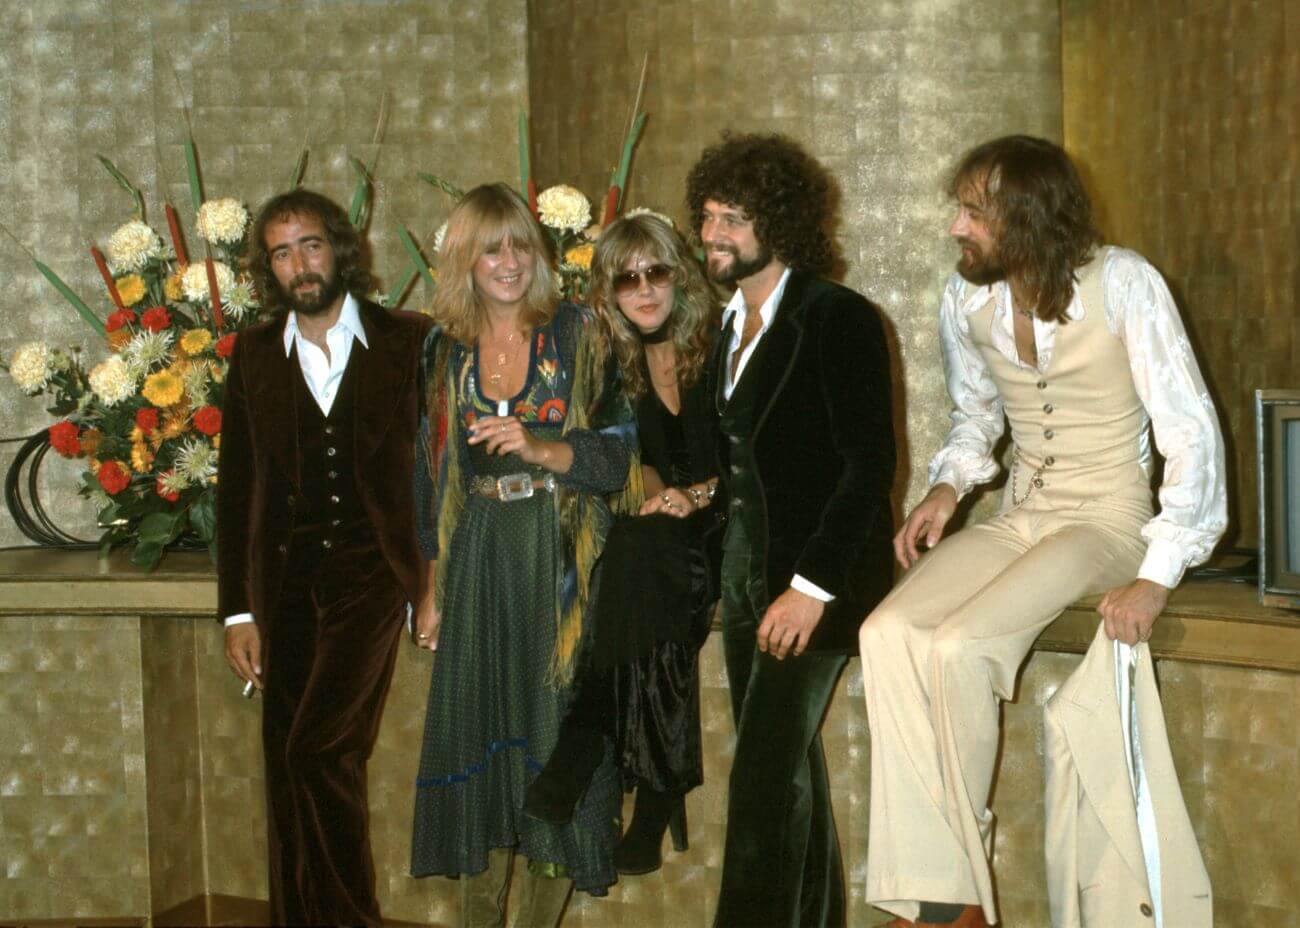 John McVie, Christine McVie, Stevie Nicks, Lindsey Buckingham, and Mick Fleetwood lean against a ledge decorated with flowers.